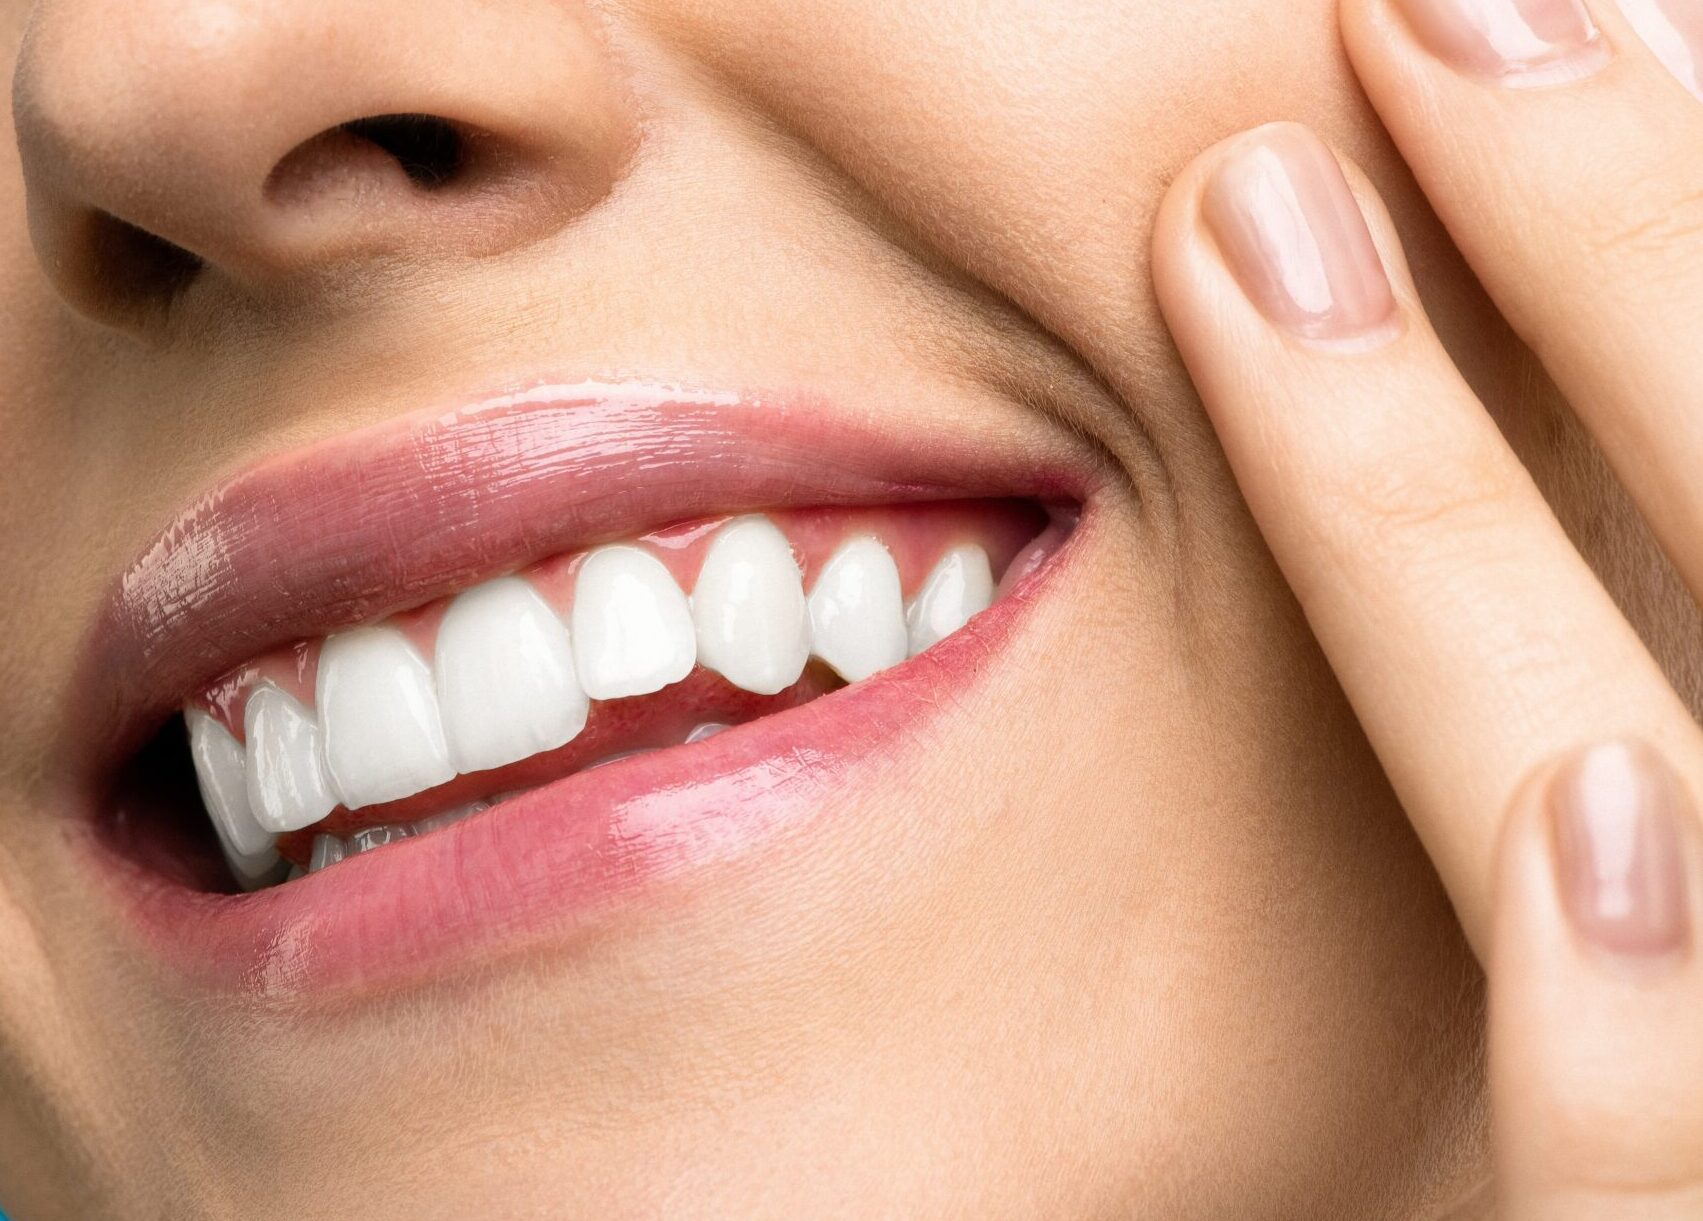 Best Practices for Healthy Teeth & Gums